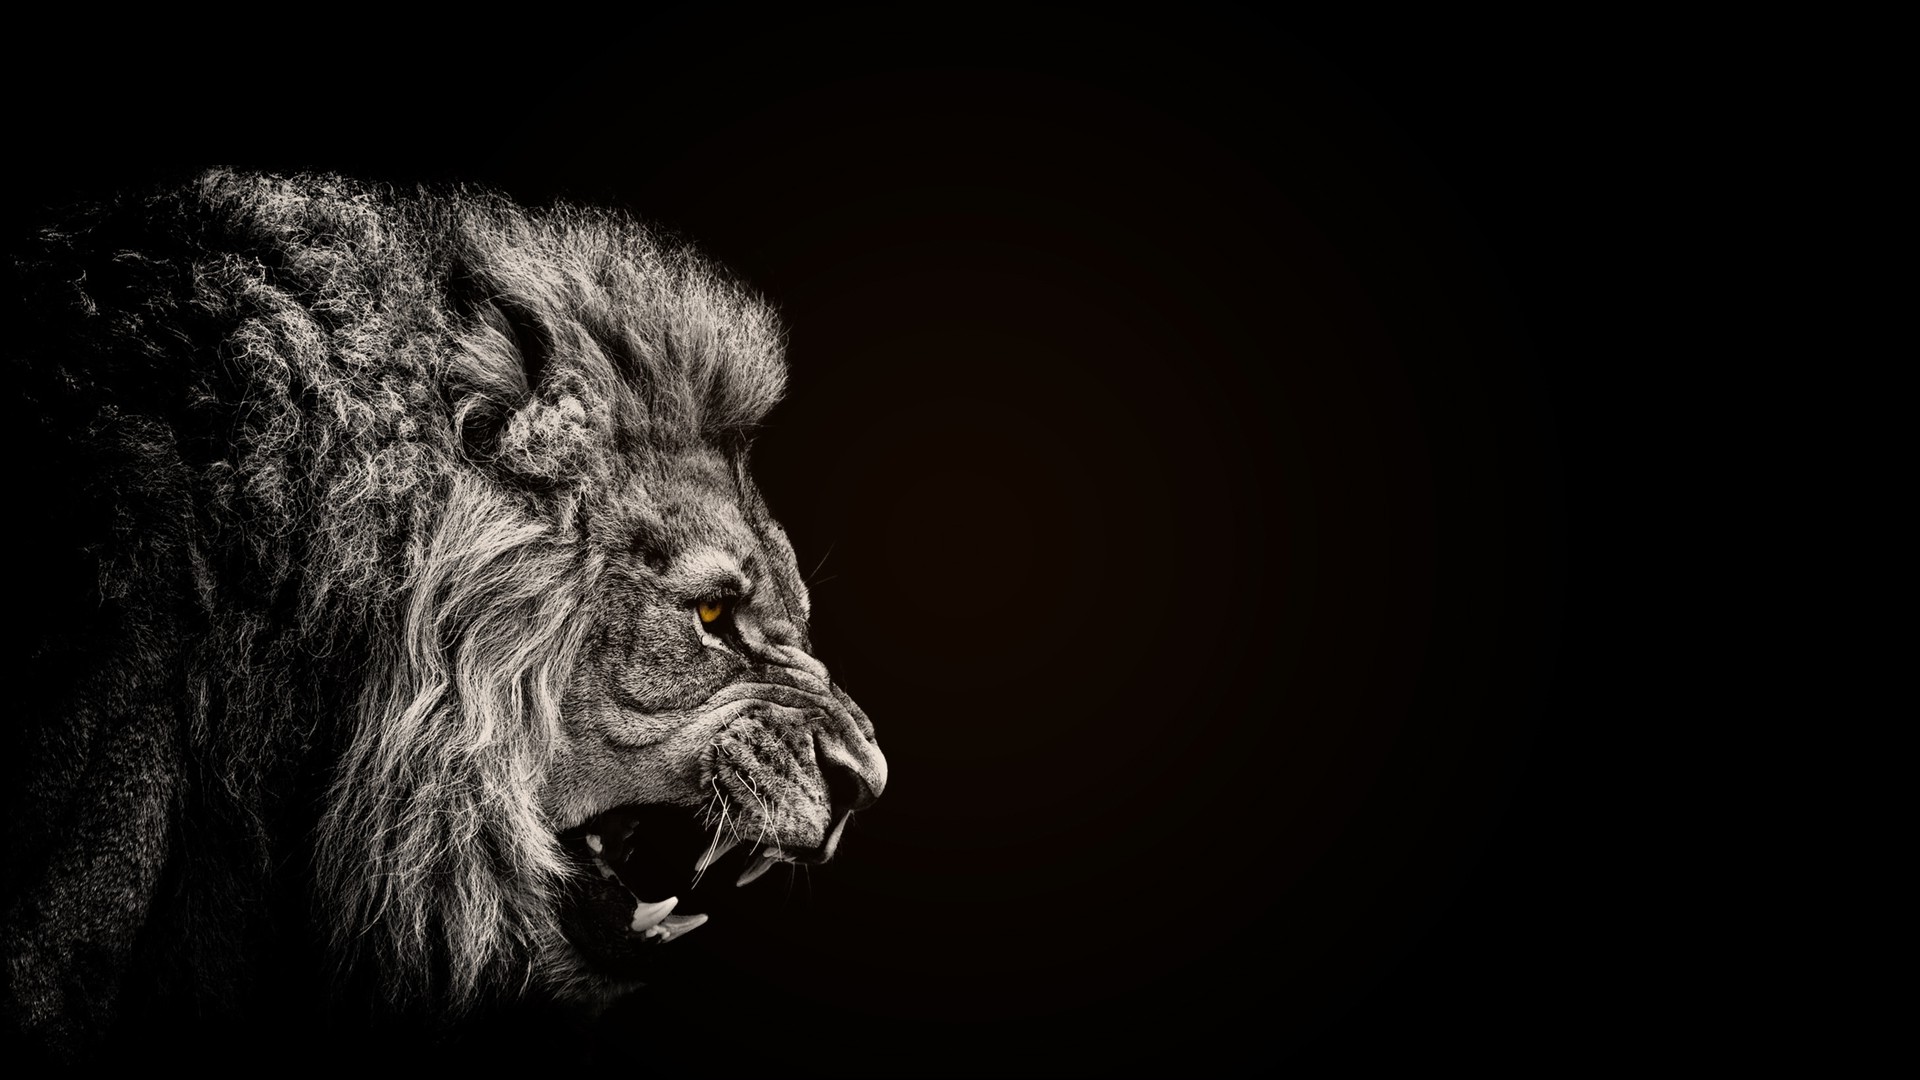 Background Pictures Lion | Background Wallpaper